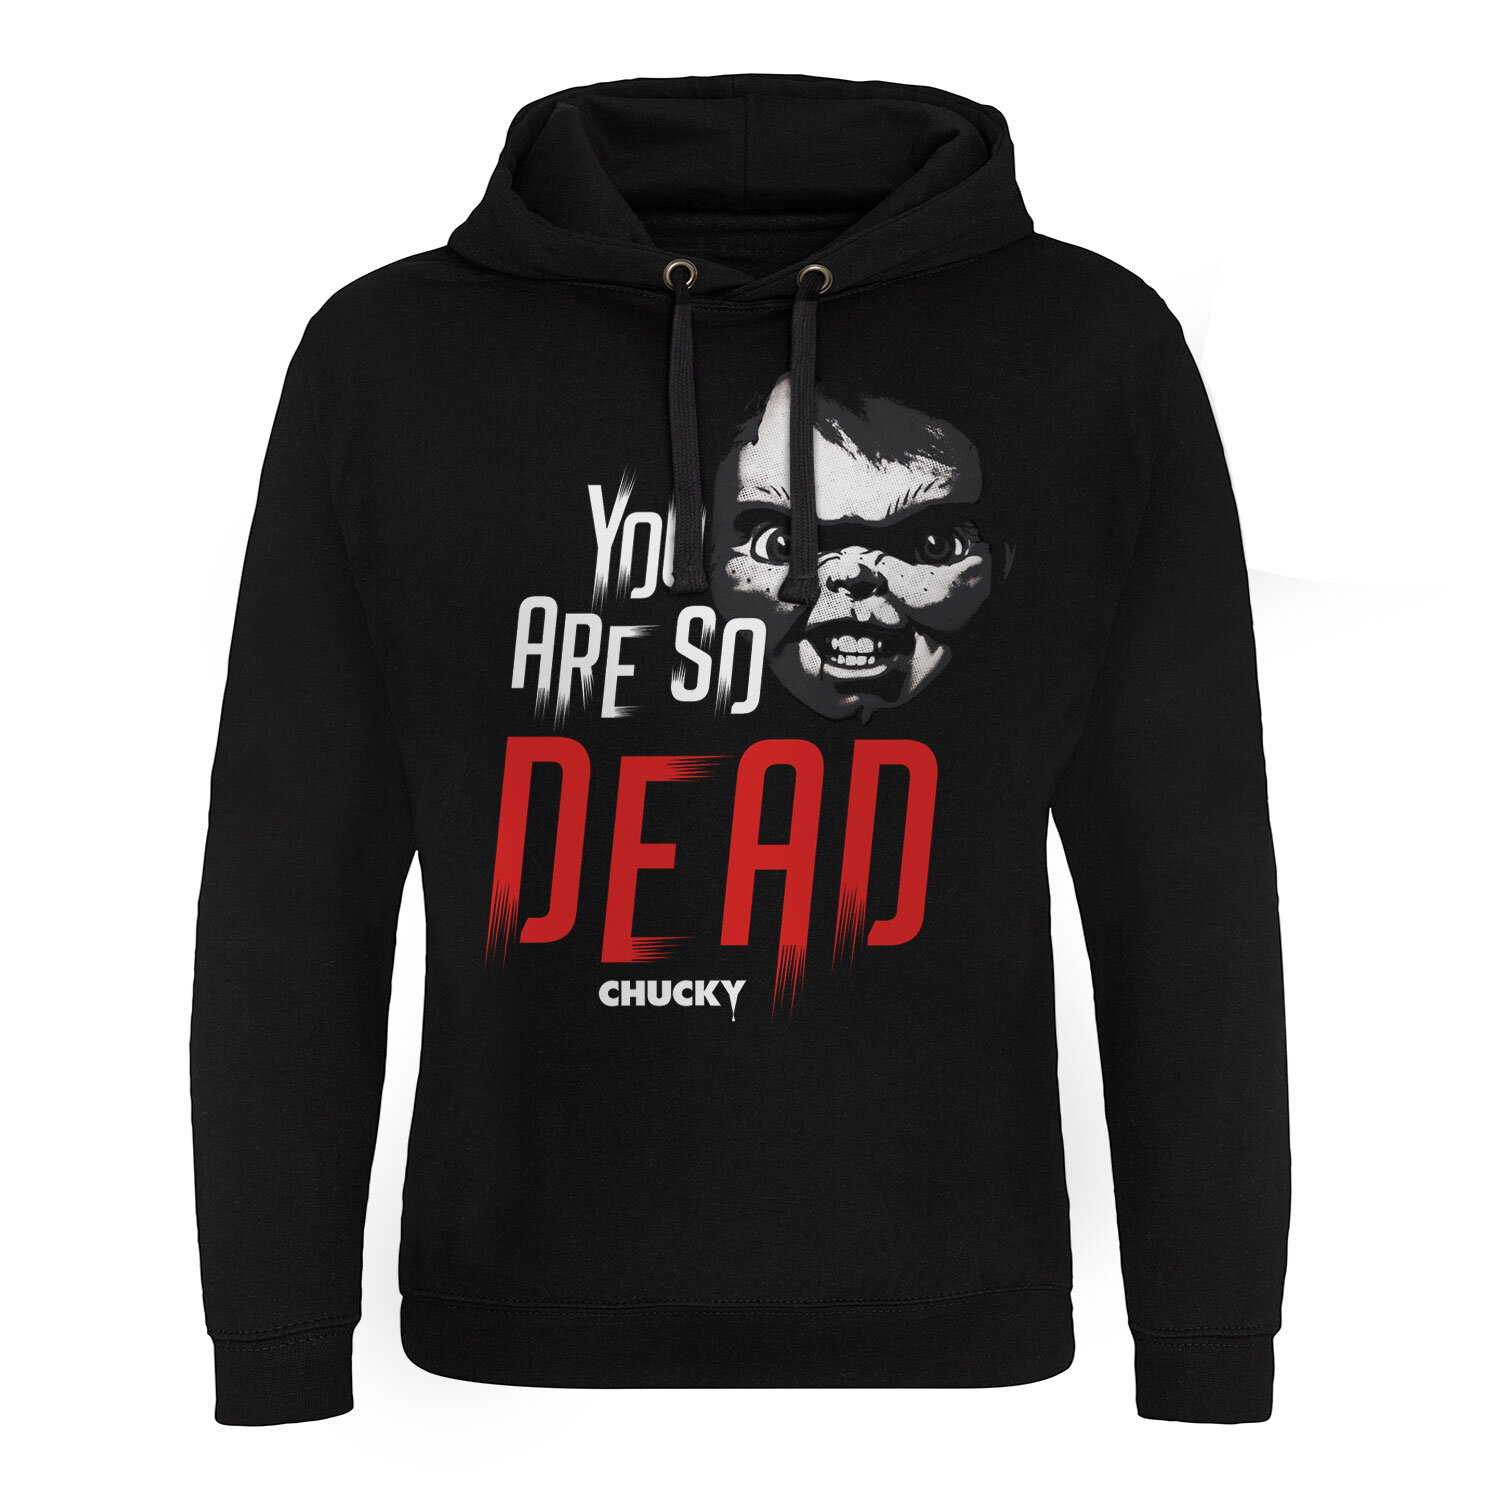 Chucky - You Are So Dead Epic Hoodie